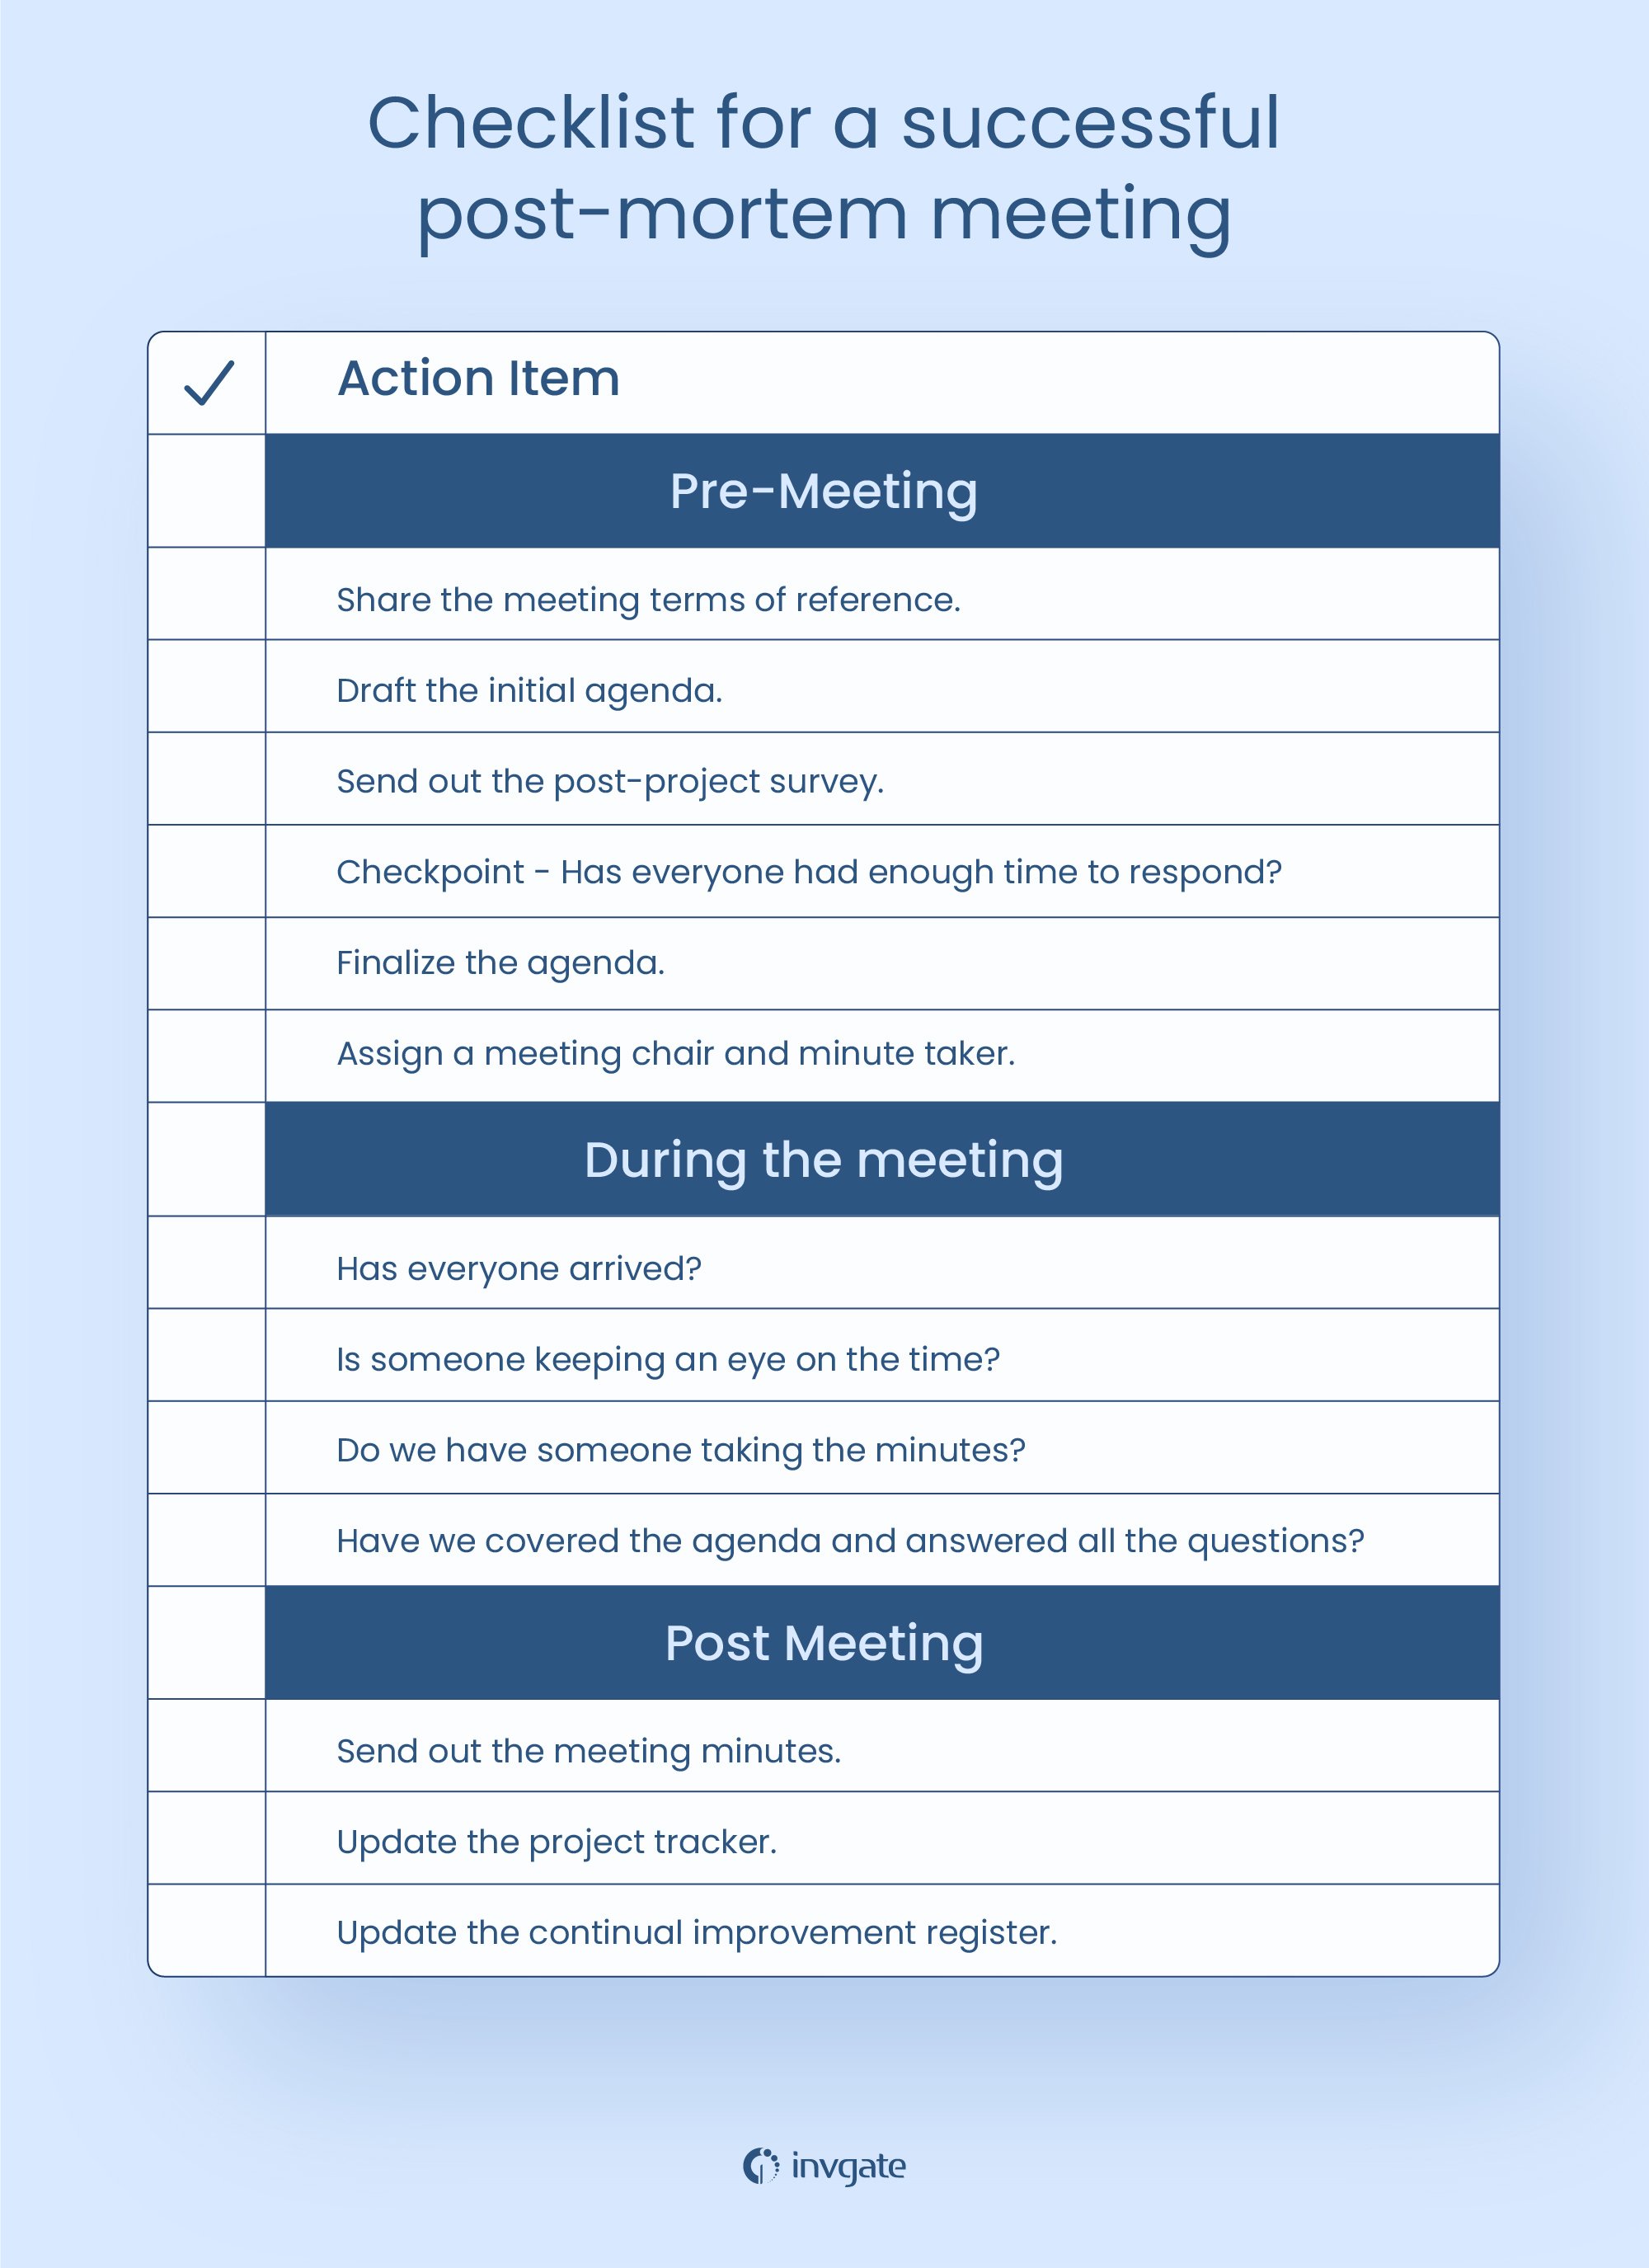 If you were wondering how to run a post-mortem meeting, this post-mortem meeting checklist is a must to have at hand!